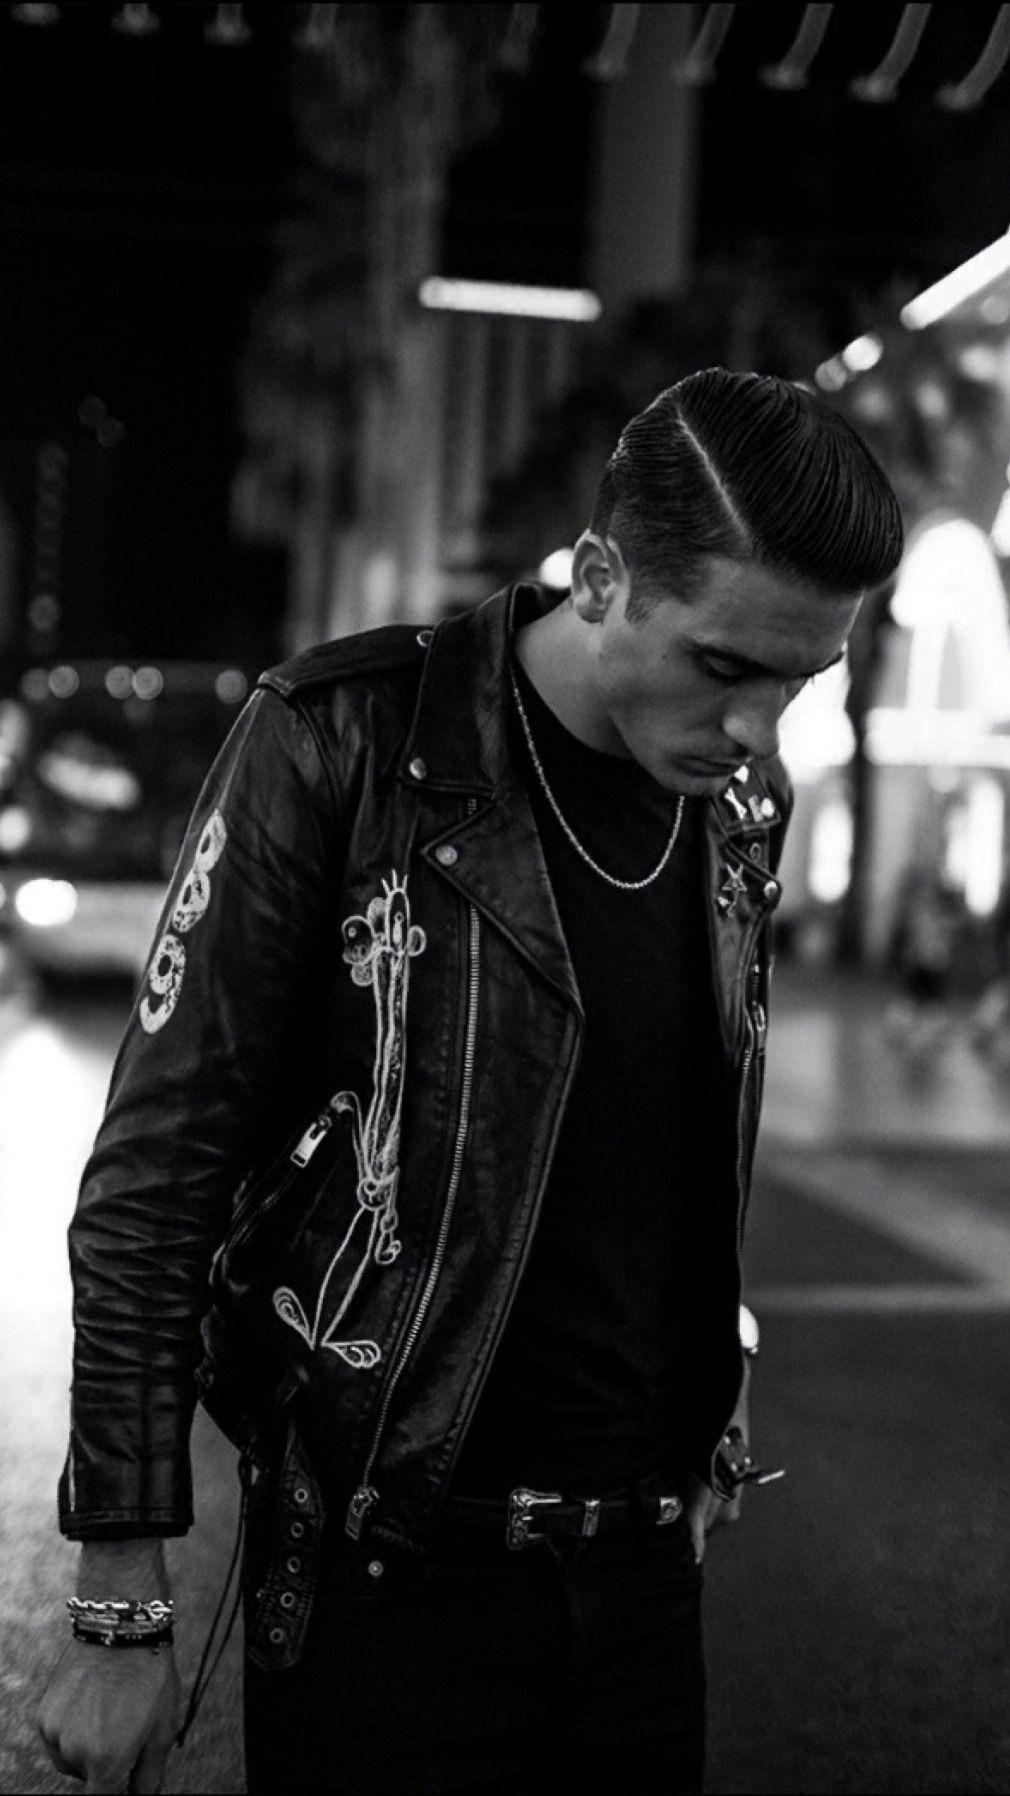 G Eazy Iphone Wallpapers